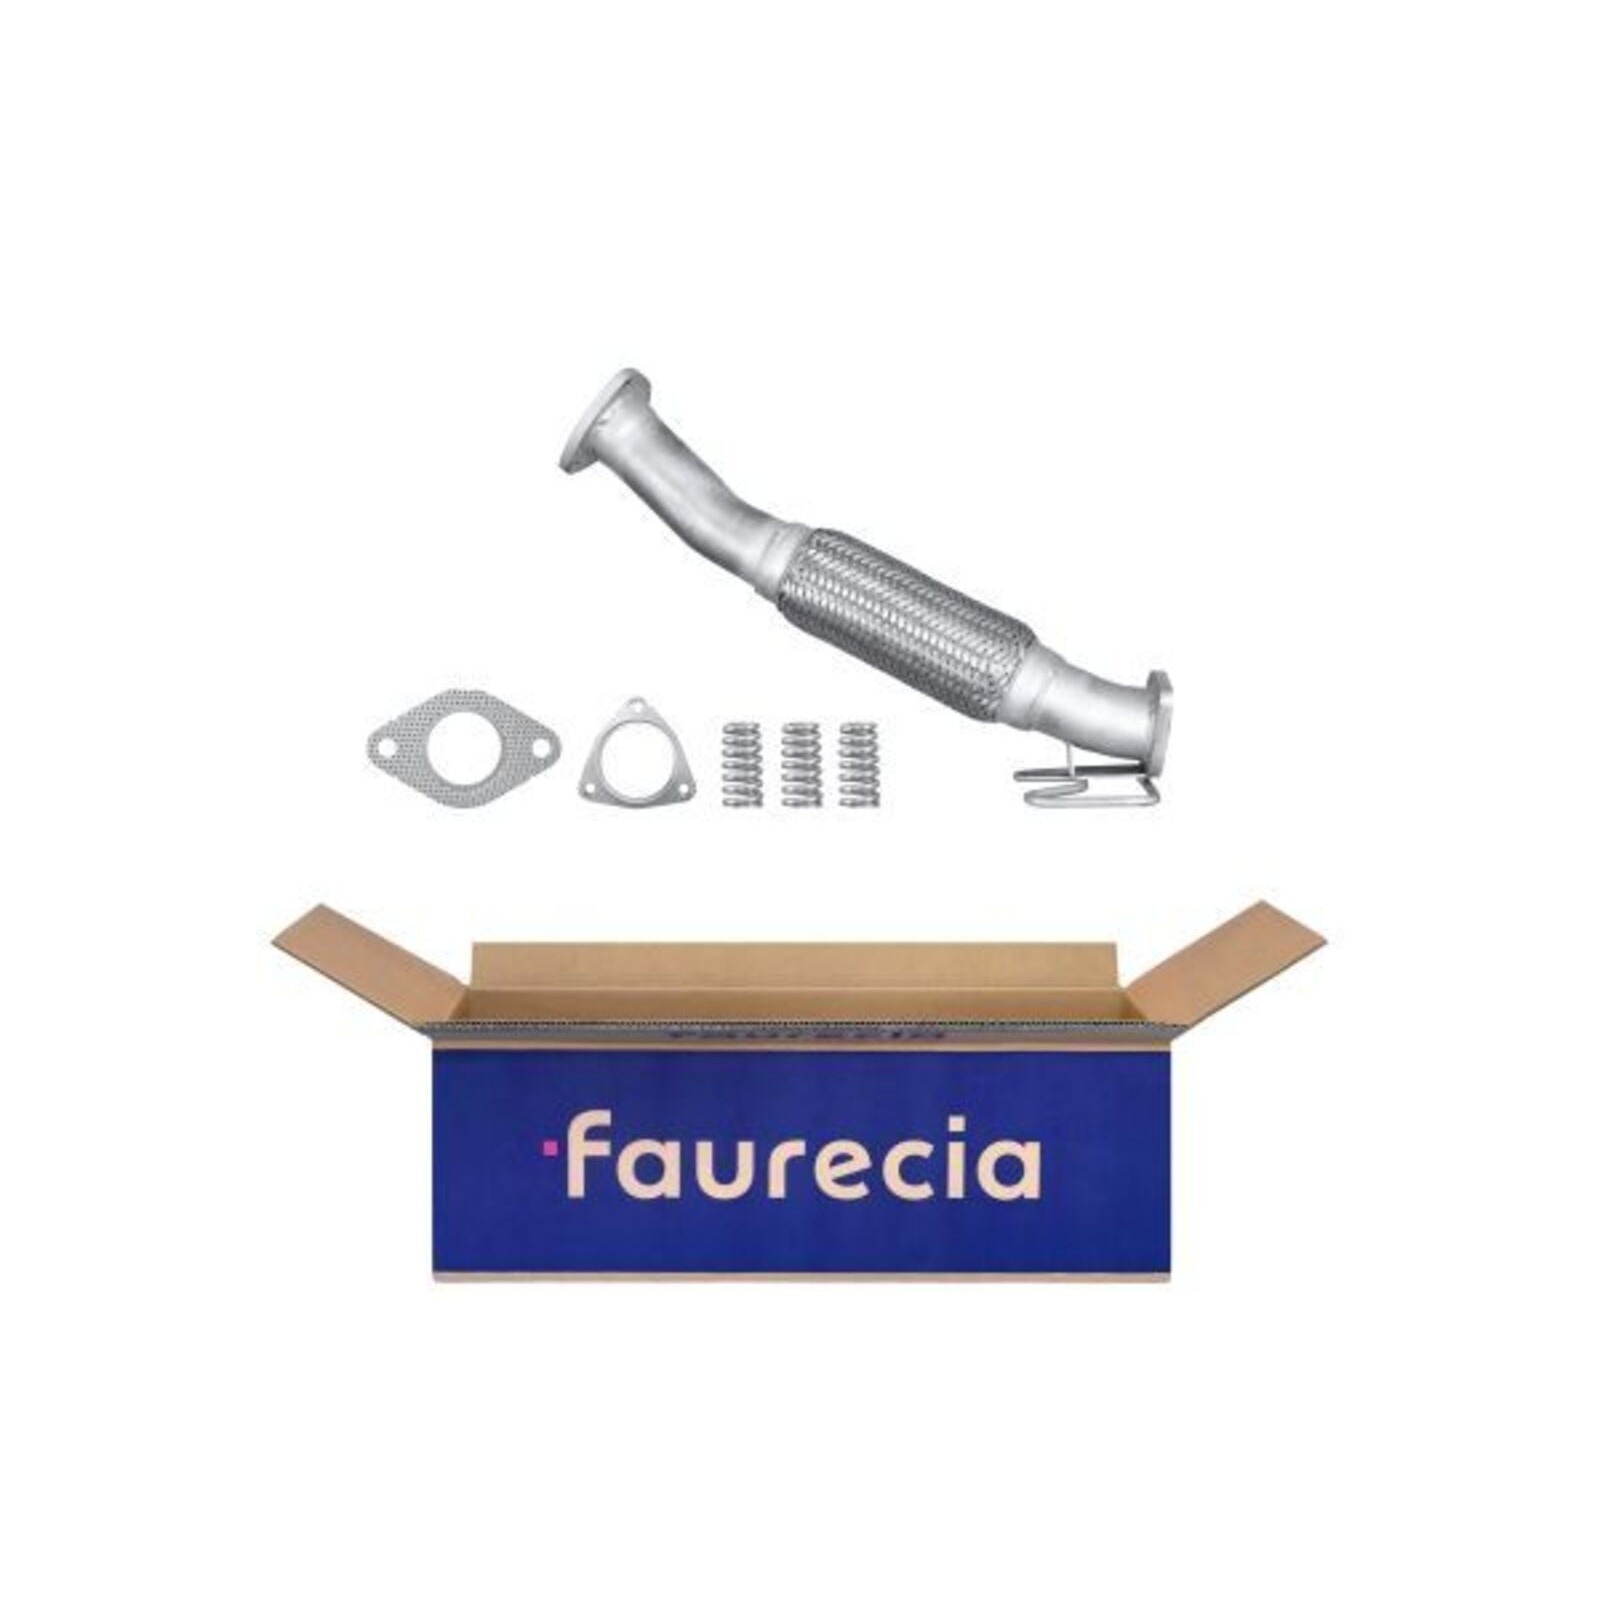 HELLA Abgasrohr Easy2Fit – PARTNERED with Faurecia